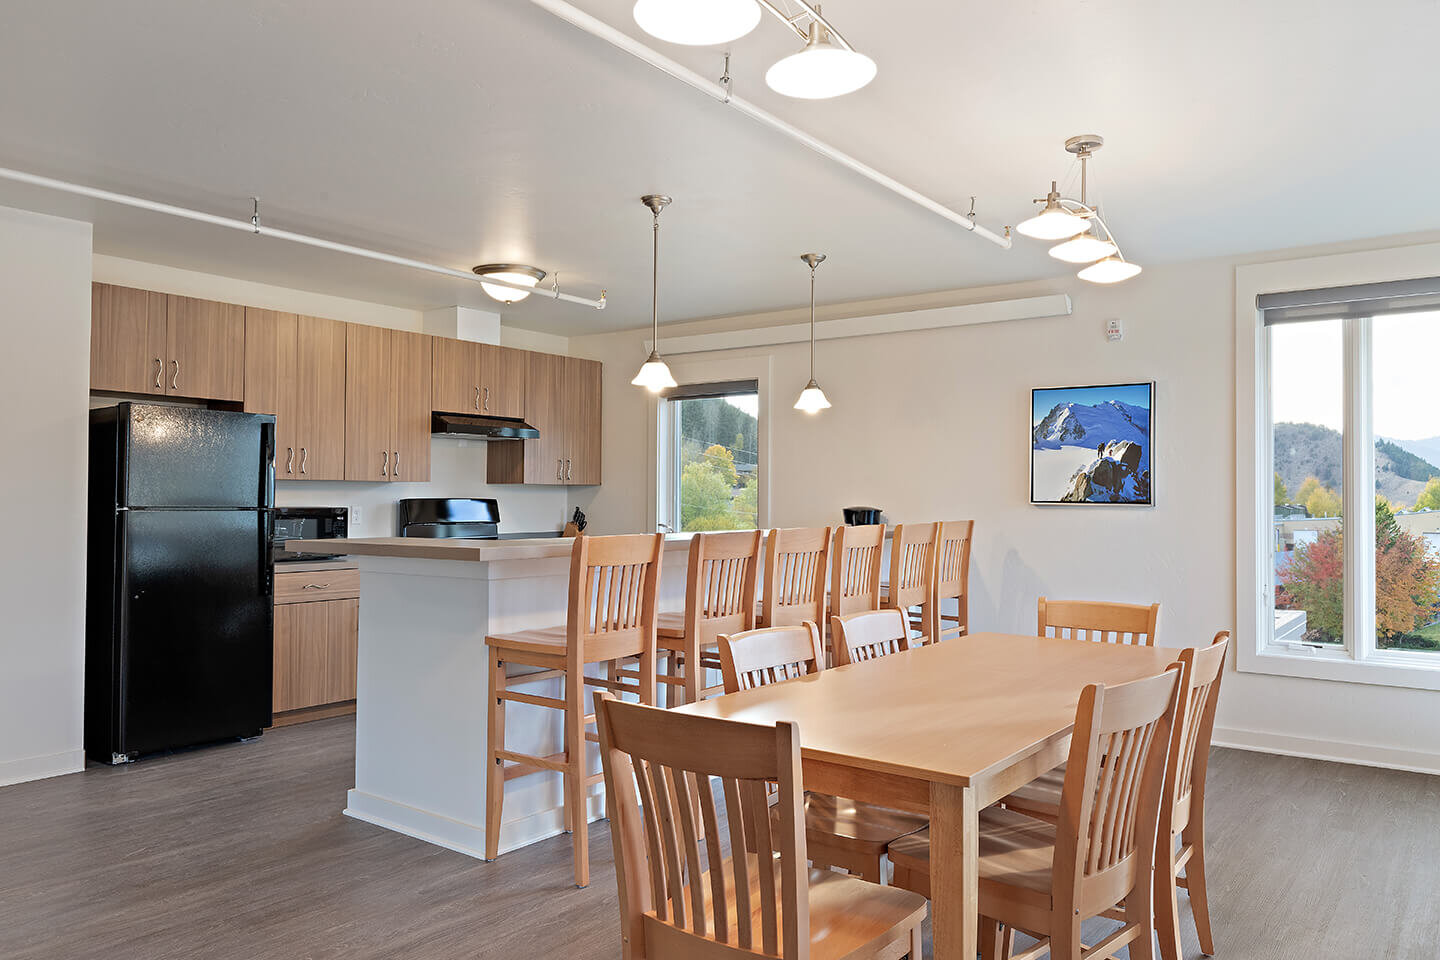 Commons kitchen with dining room table and chairs